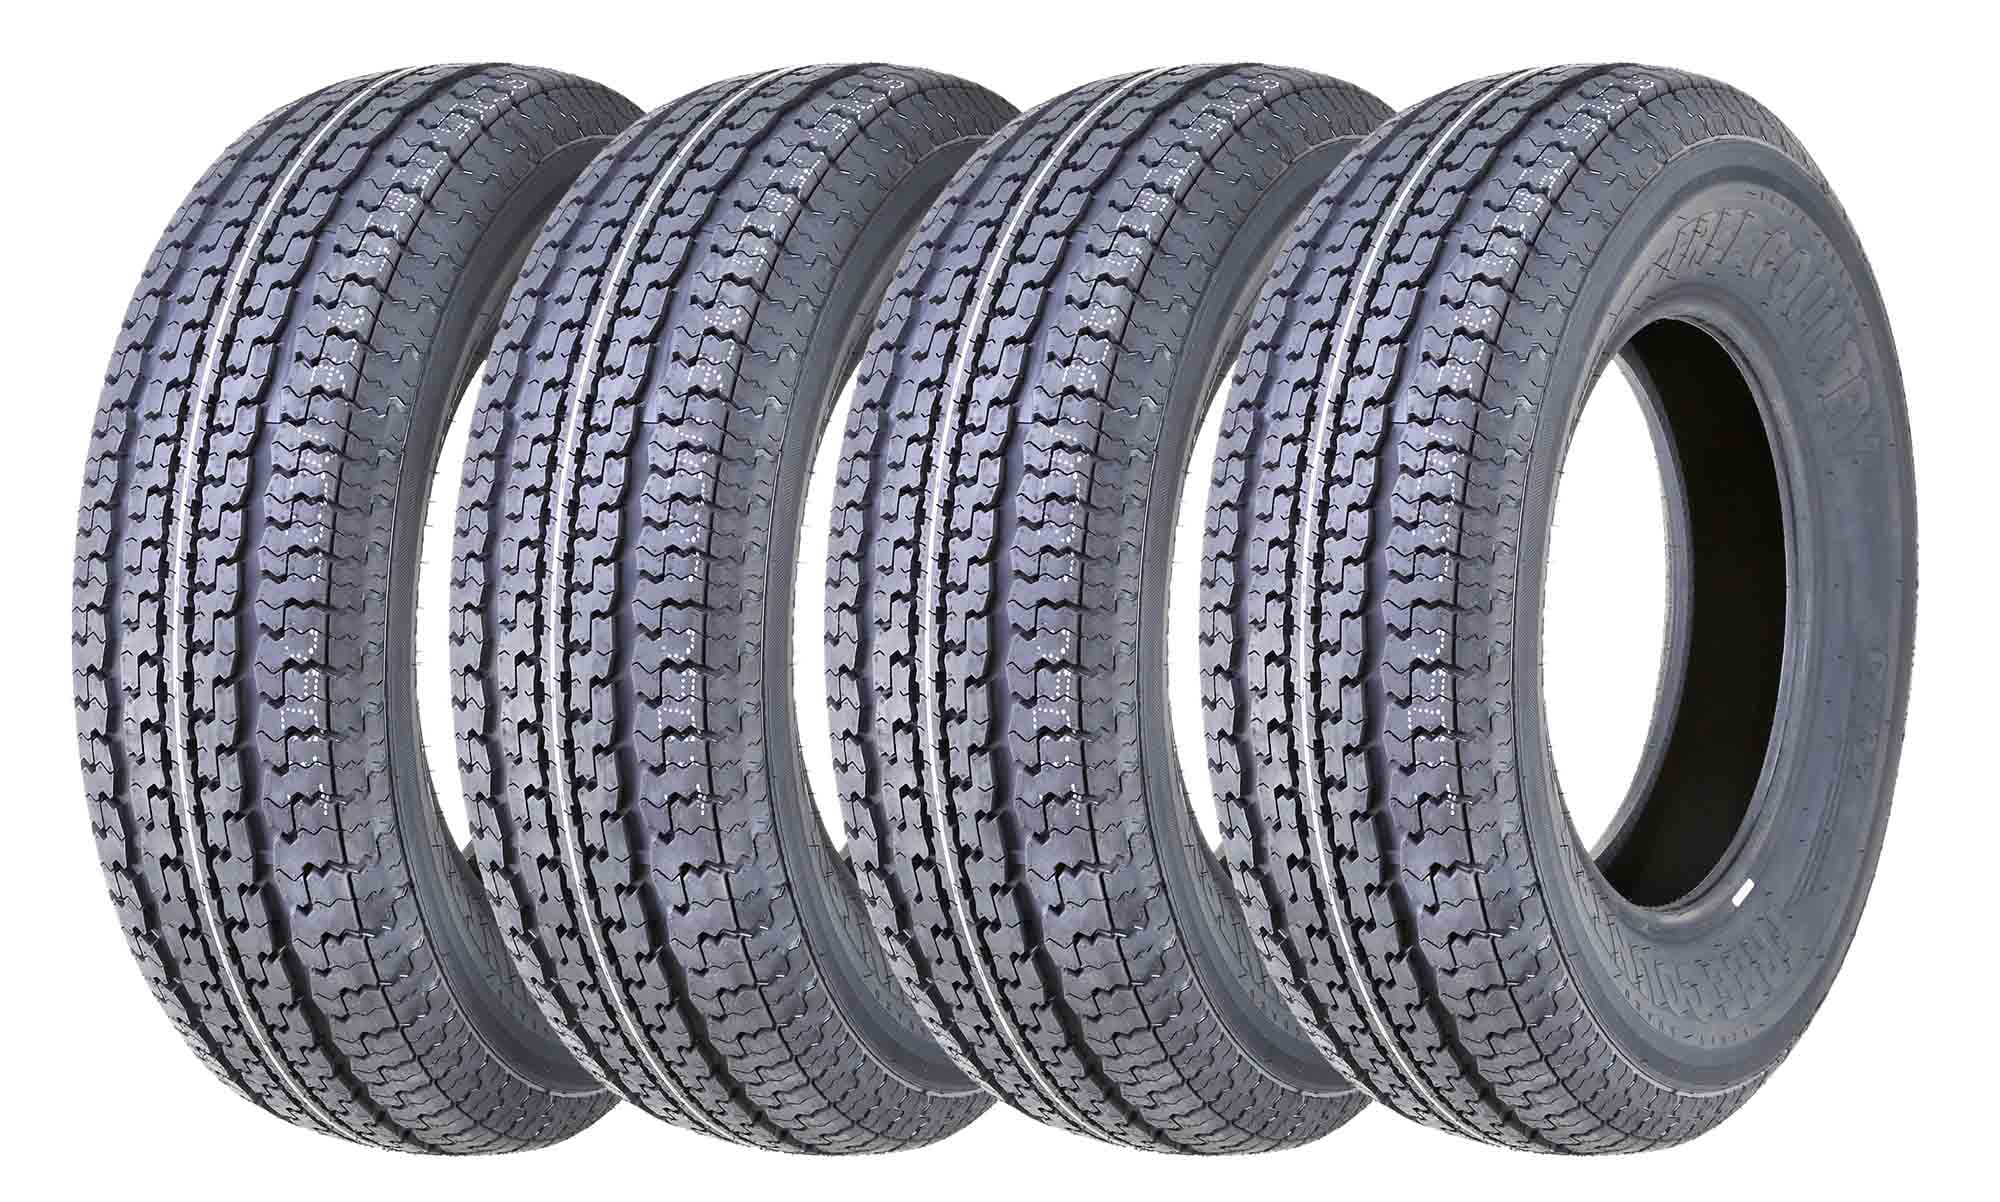 Two New Trailer Tires ST205/90D15 Bias 10 Ply load range 700-15 HD 7.00-15 